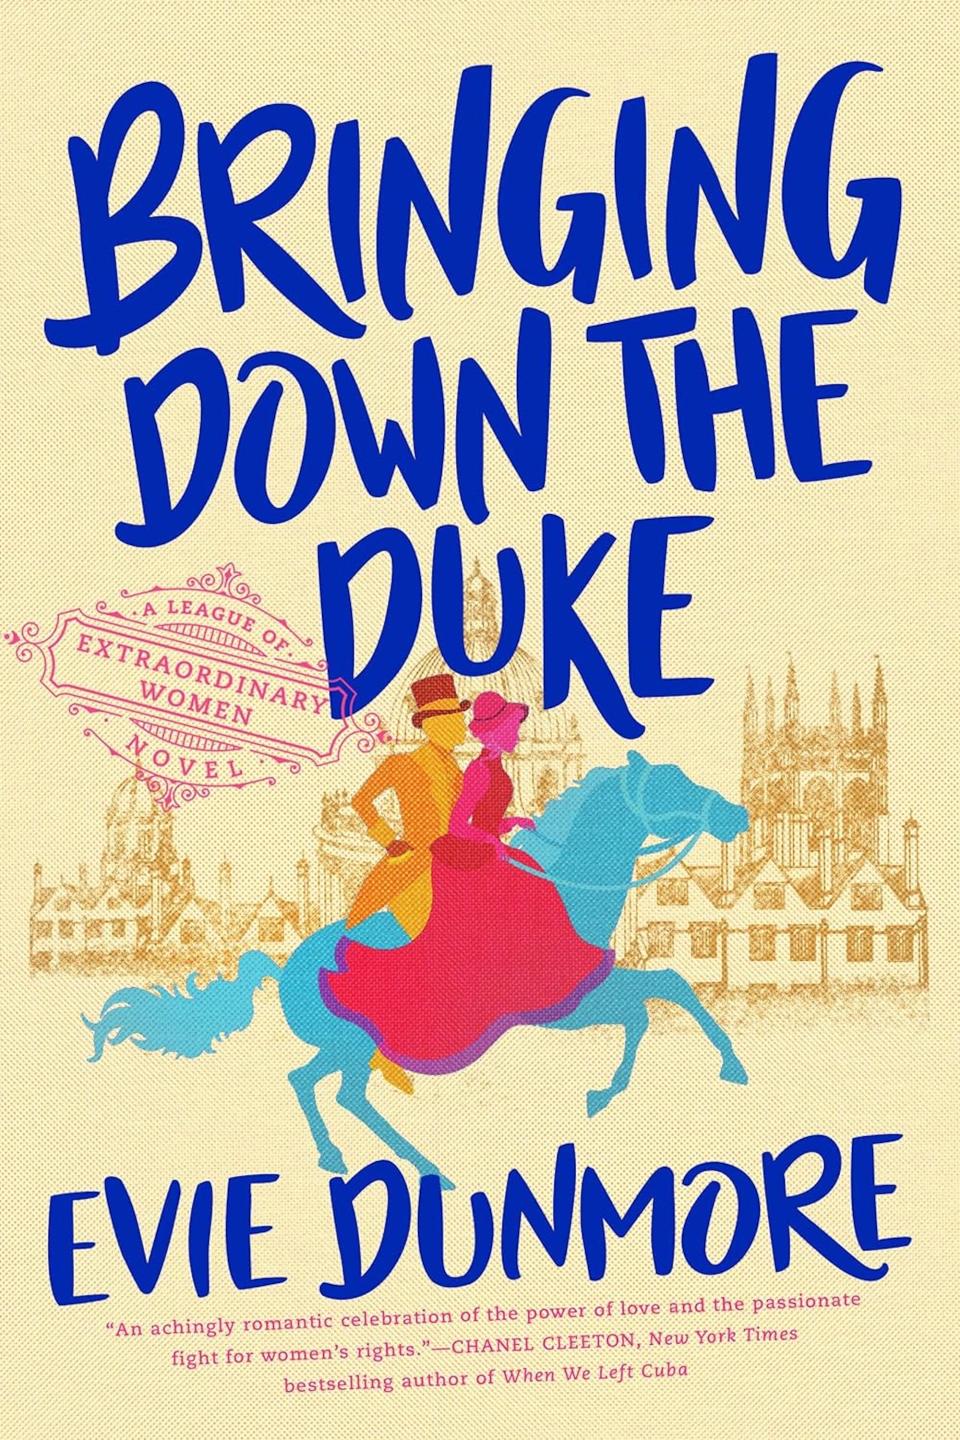 The cover of "Bringing Down the Duke" by Evie Dunmore.